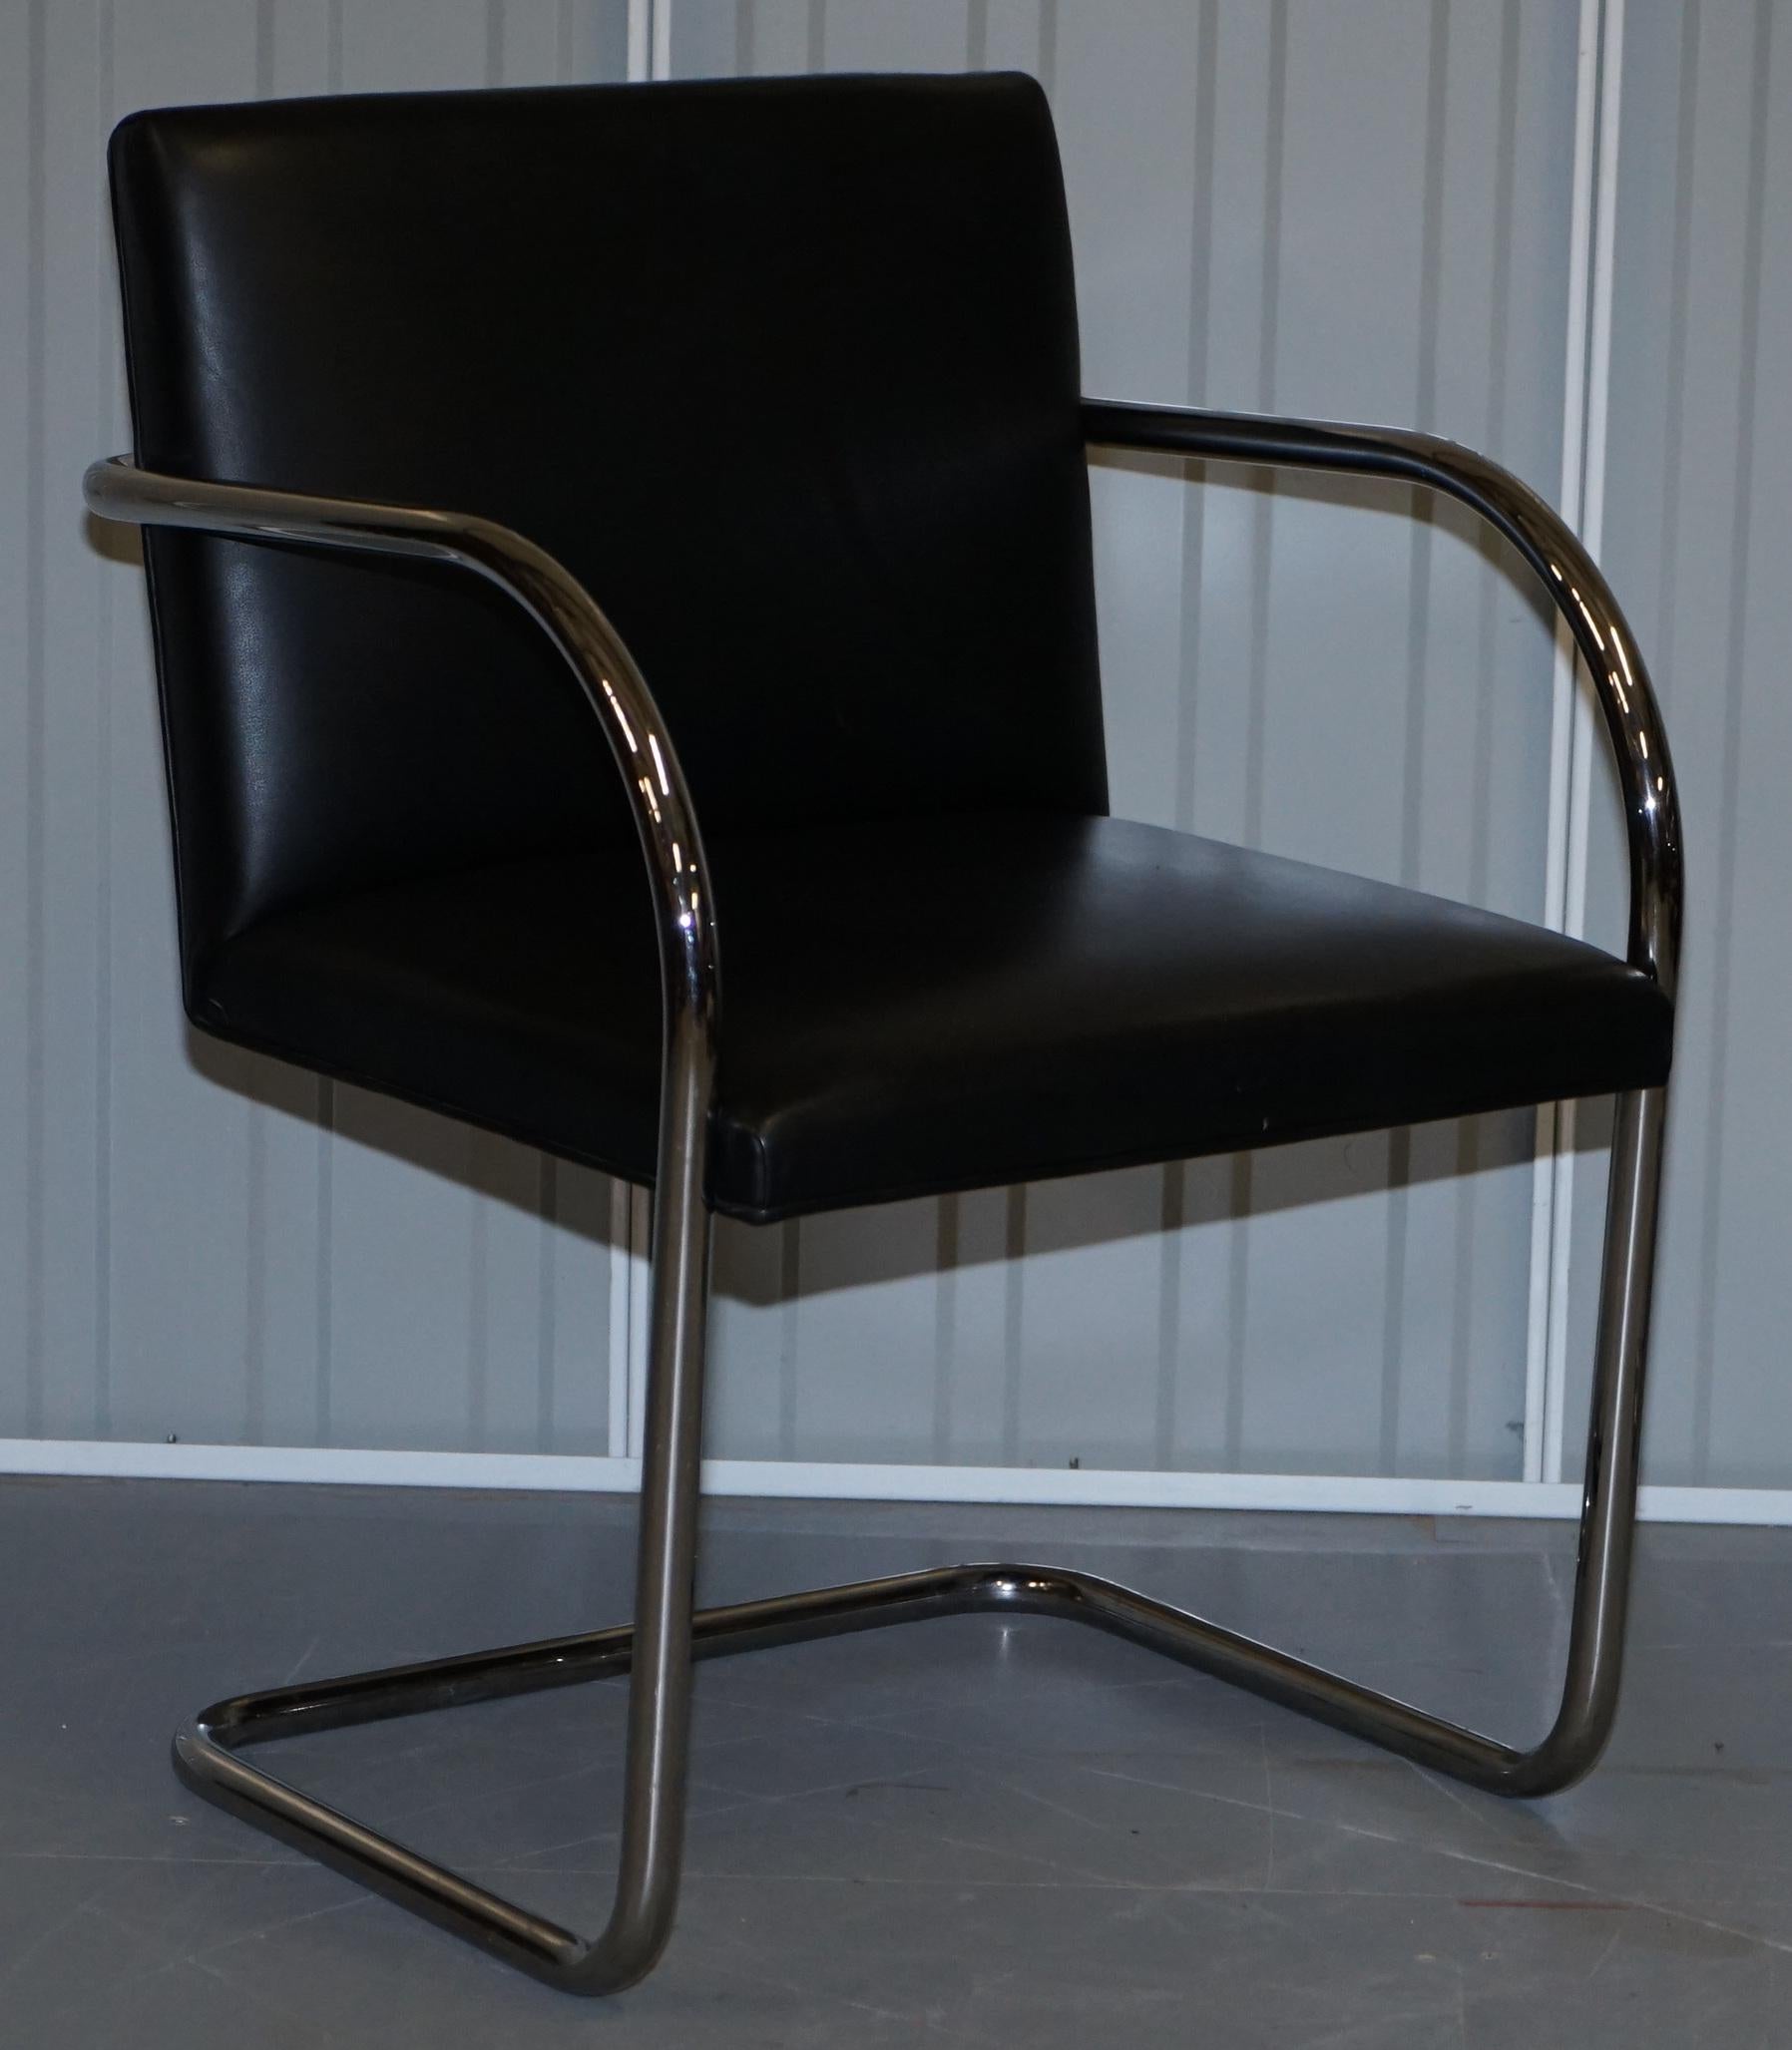 We are delighted to offer for sale this stunning pair of original vintage black leather on chrome frames Walter Knoll Brno armchairs designed by the genius that is Mies Van Der Rohe

A truly iconic pair of chairs, designed by Mies, full details